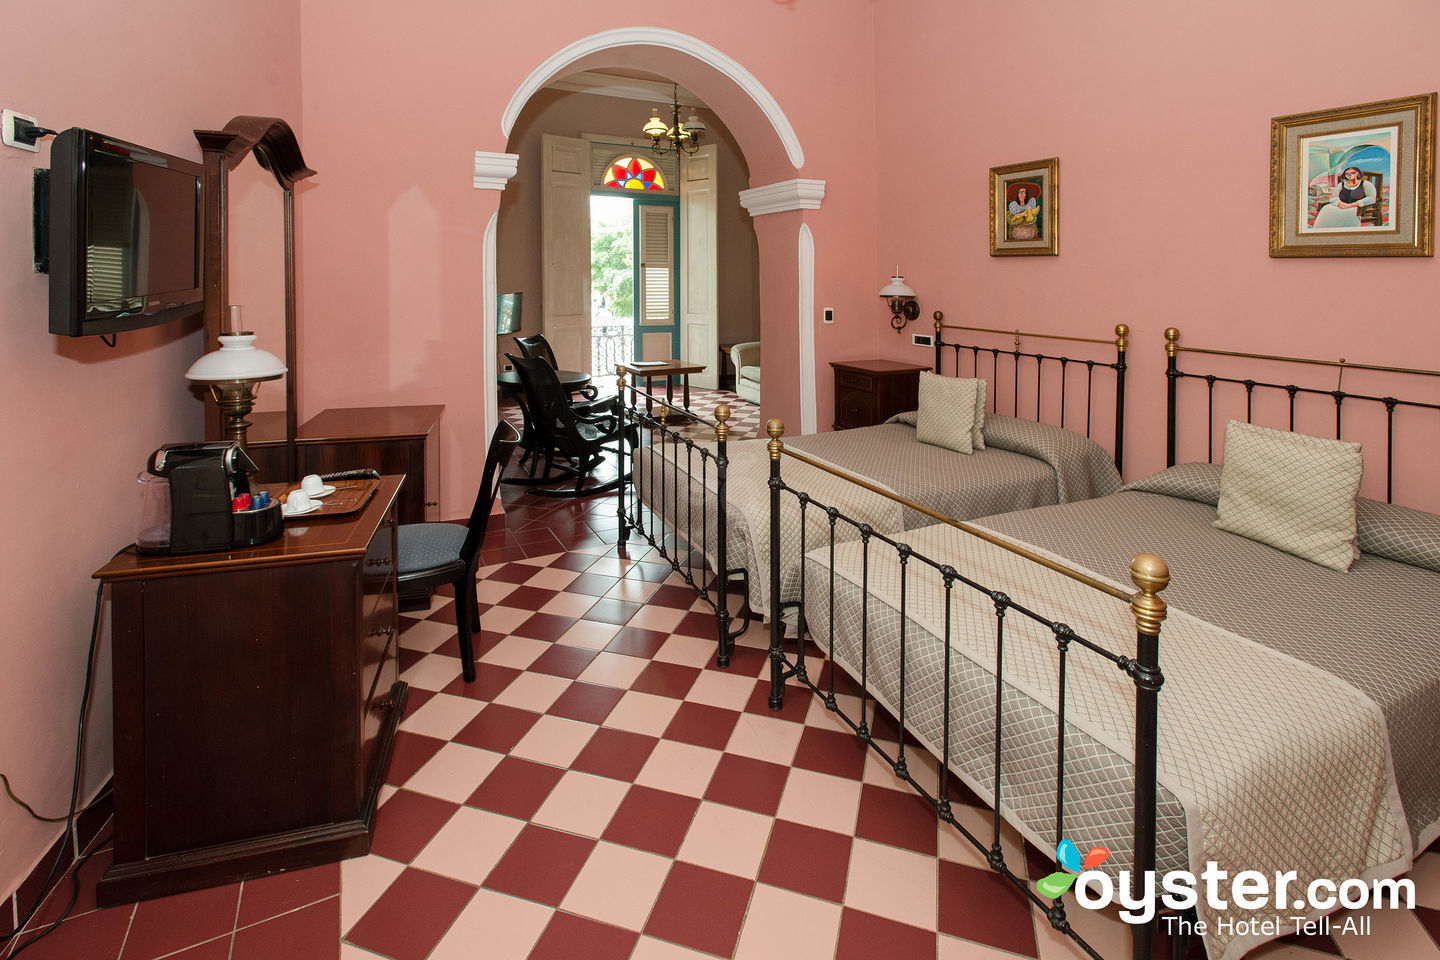 Hotel Santa Isabel Review: What To REALLY Expect If You Stay